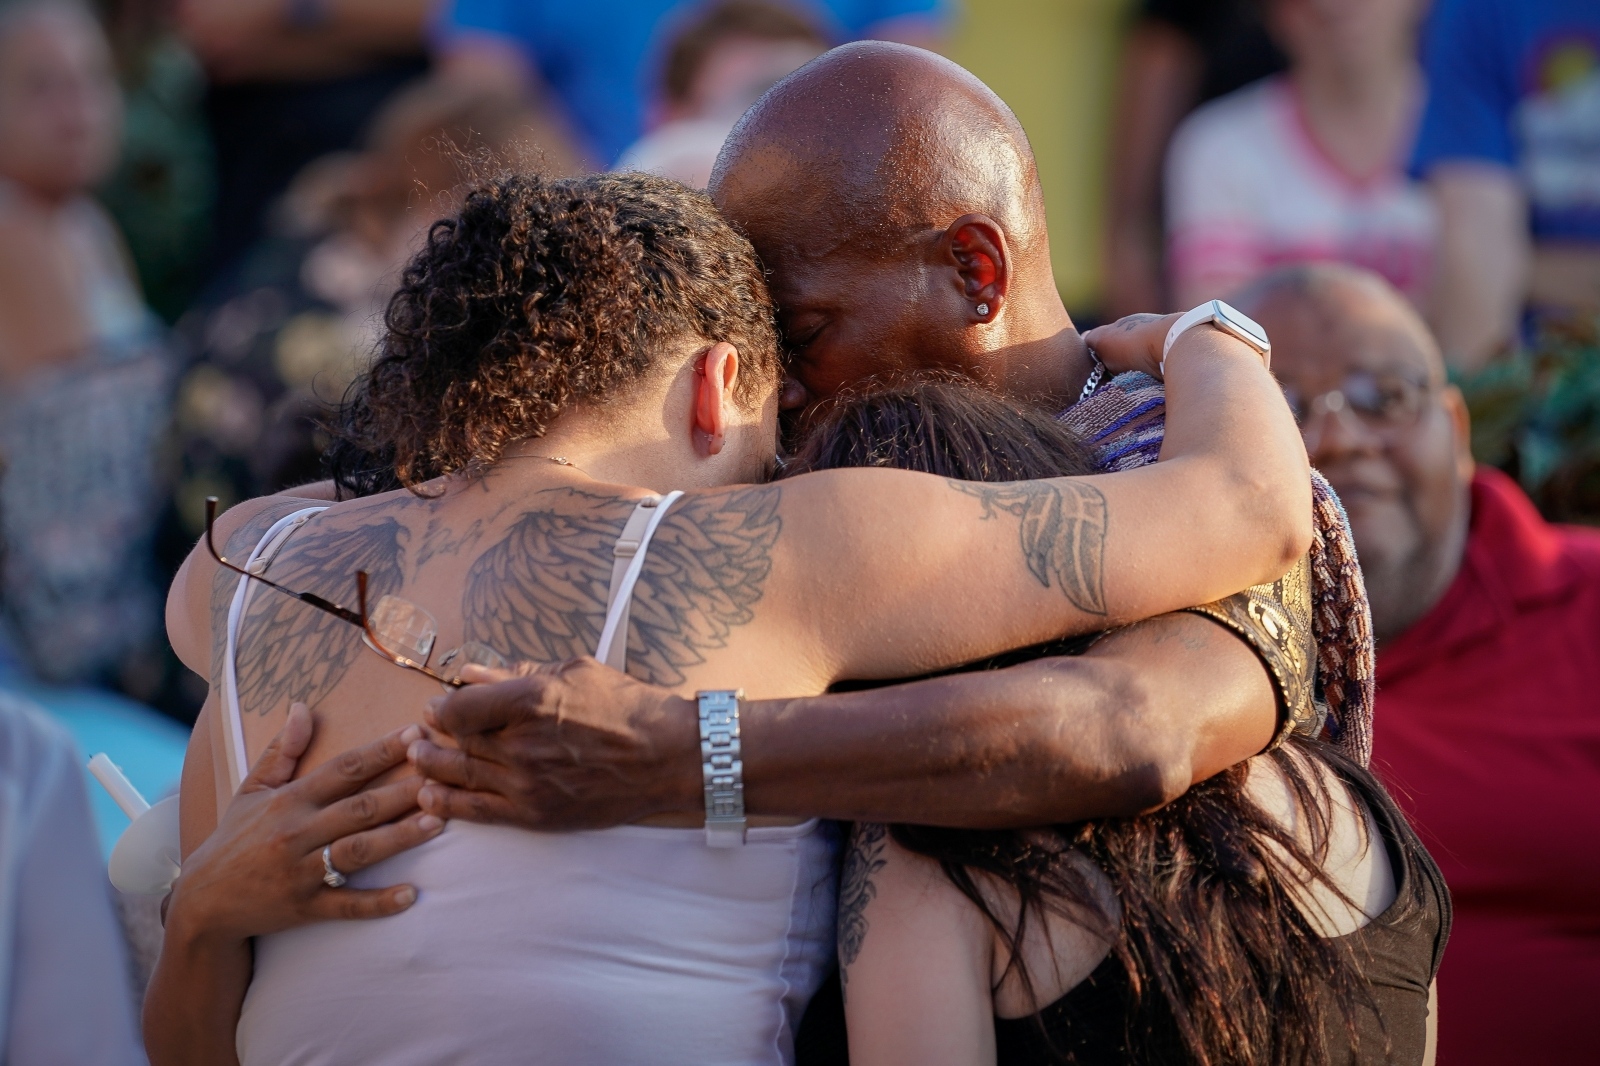 Family and friends of Derek Fudge, who was killed in a mass shooting early Sunday morning in Dayton, Ohio, hug during a memorial service in Springfield Family and friends of Derek Fudge, who was killed in a mass shooting early Sunday morning in Dayton, Ohio, hug during a memorial service  in Springfield, Ohio, U.S. August 5, 2019.  REUTERS/Bryan Woolston Bryan Woolston